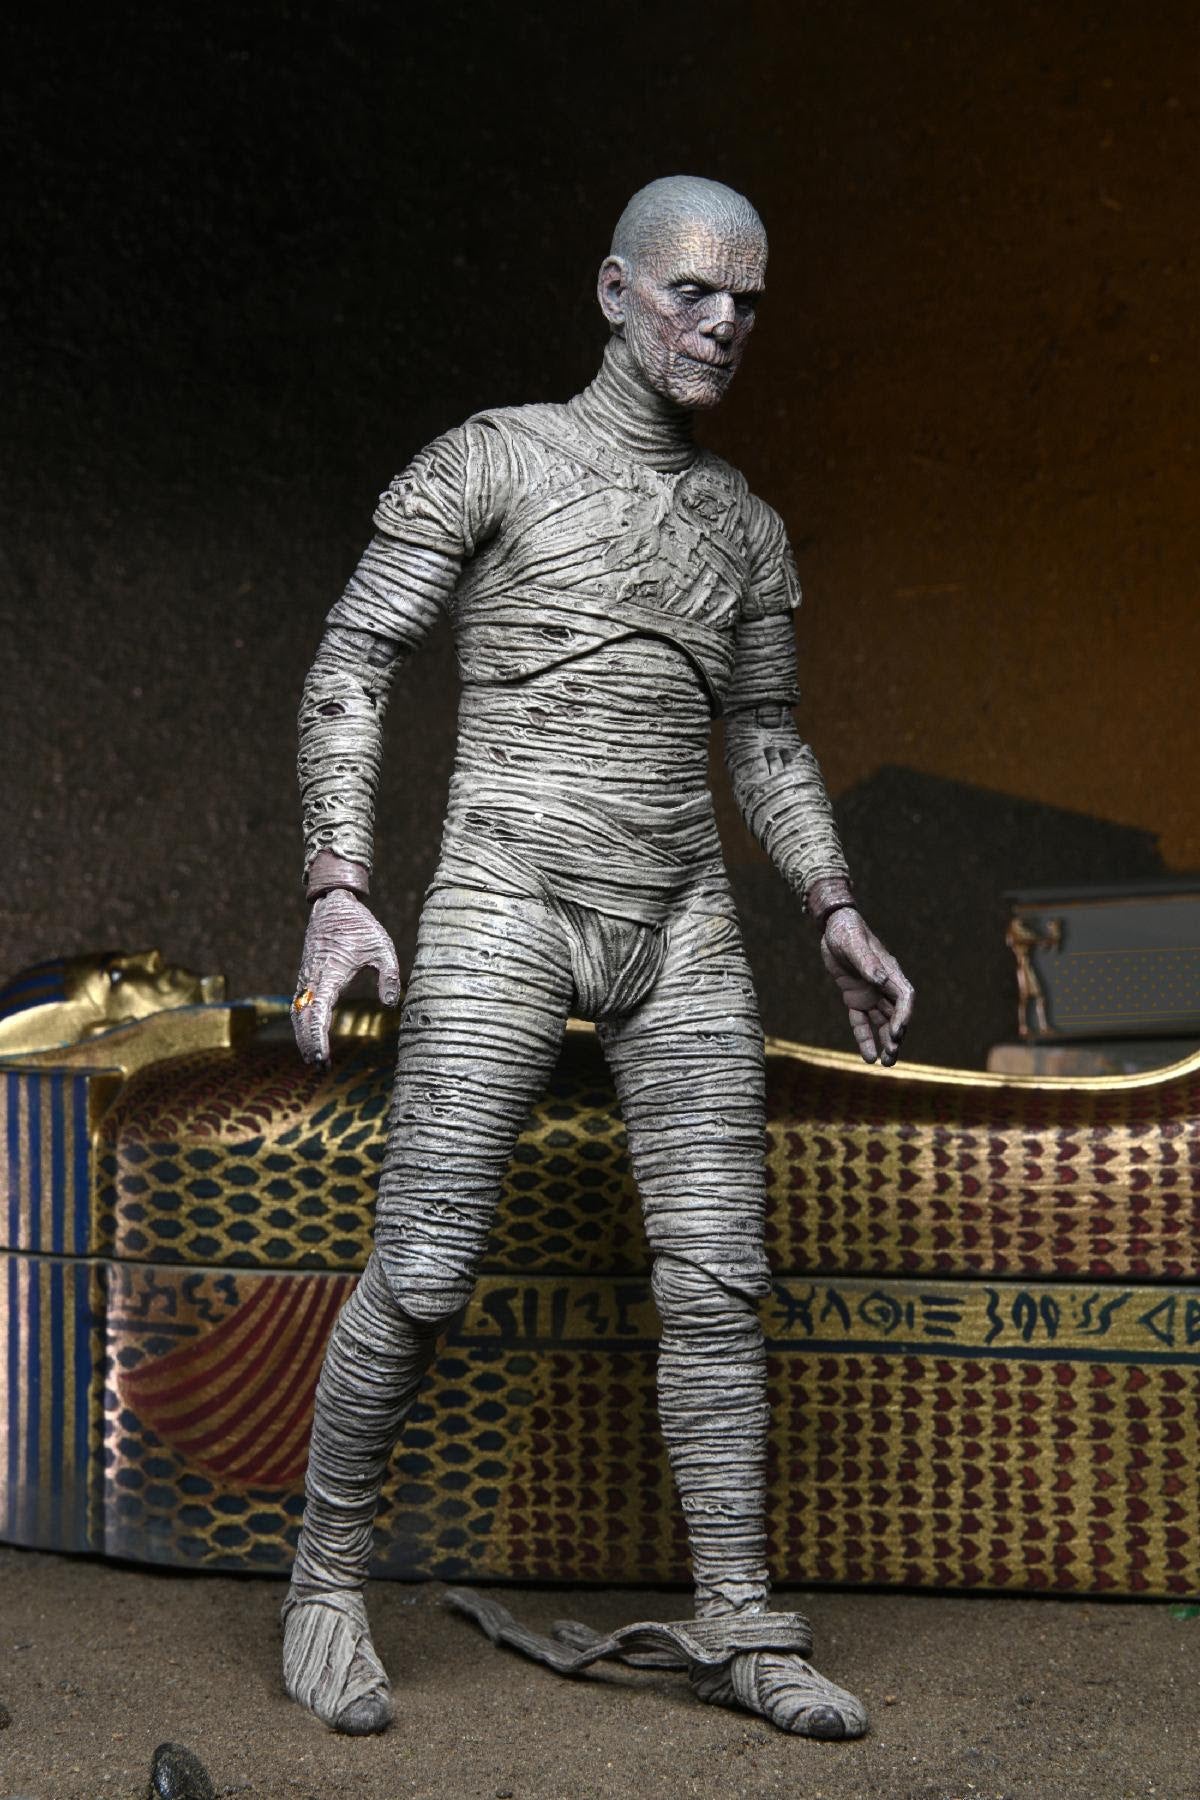 NECA - Universal Monsters - 7" Scale Action Figure - Ultimate Mummy (Color)